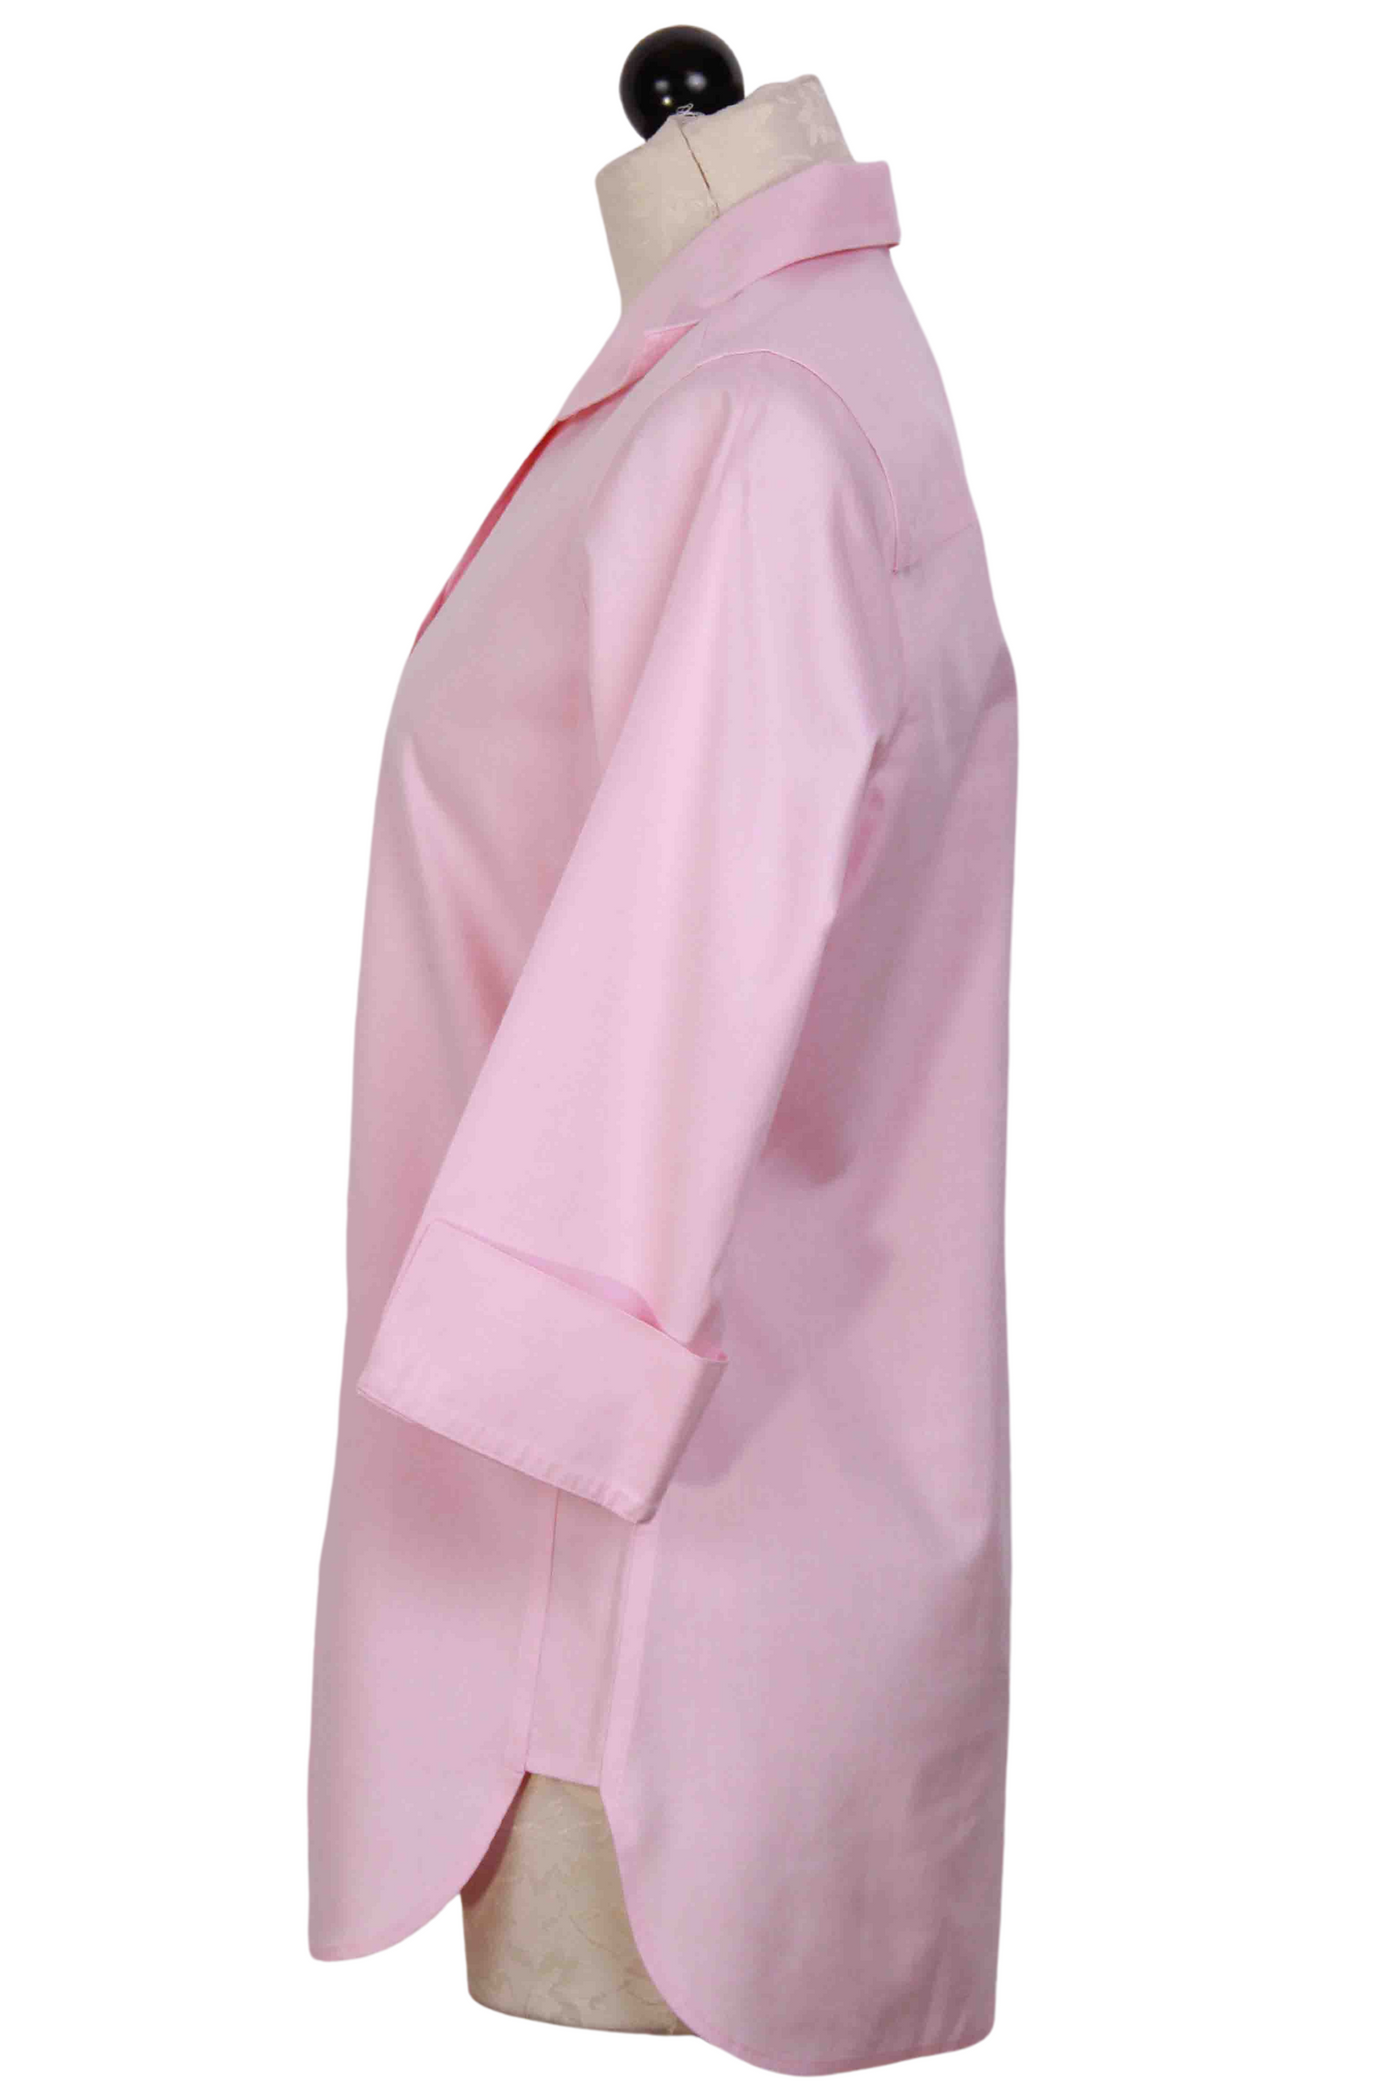 side view of Classic Chambray Pink 3/4 Sleeve Tunic Style Pandora Blouse by Foxcroft